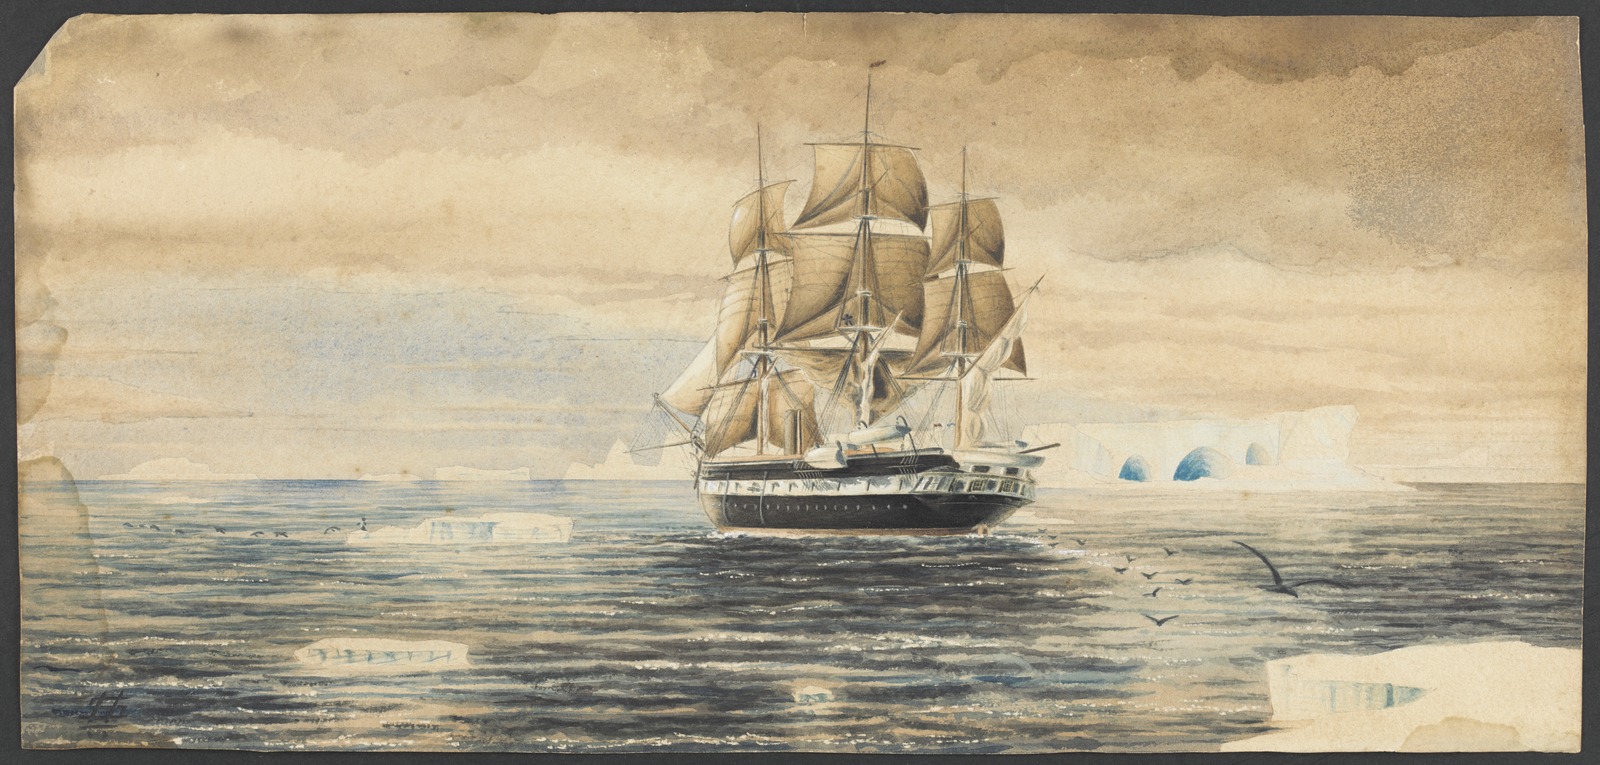 A painting of the HMS Challenger ship sailing the oceans of the Arctic.